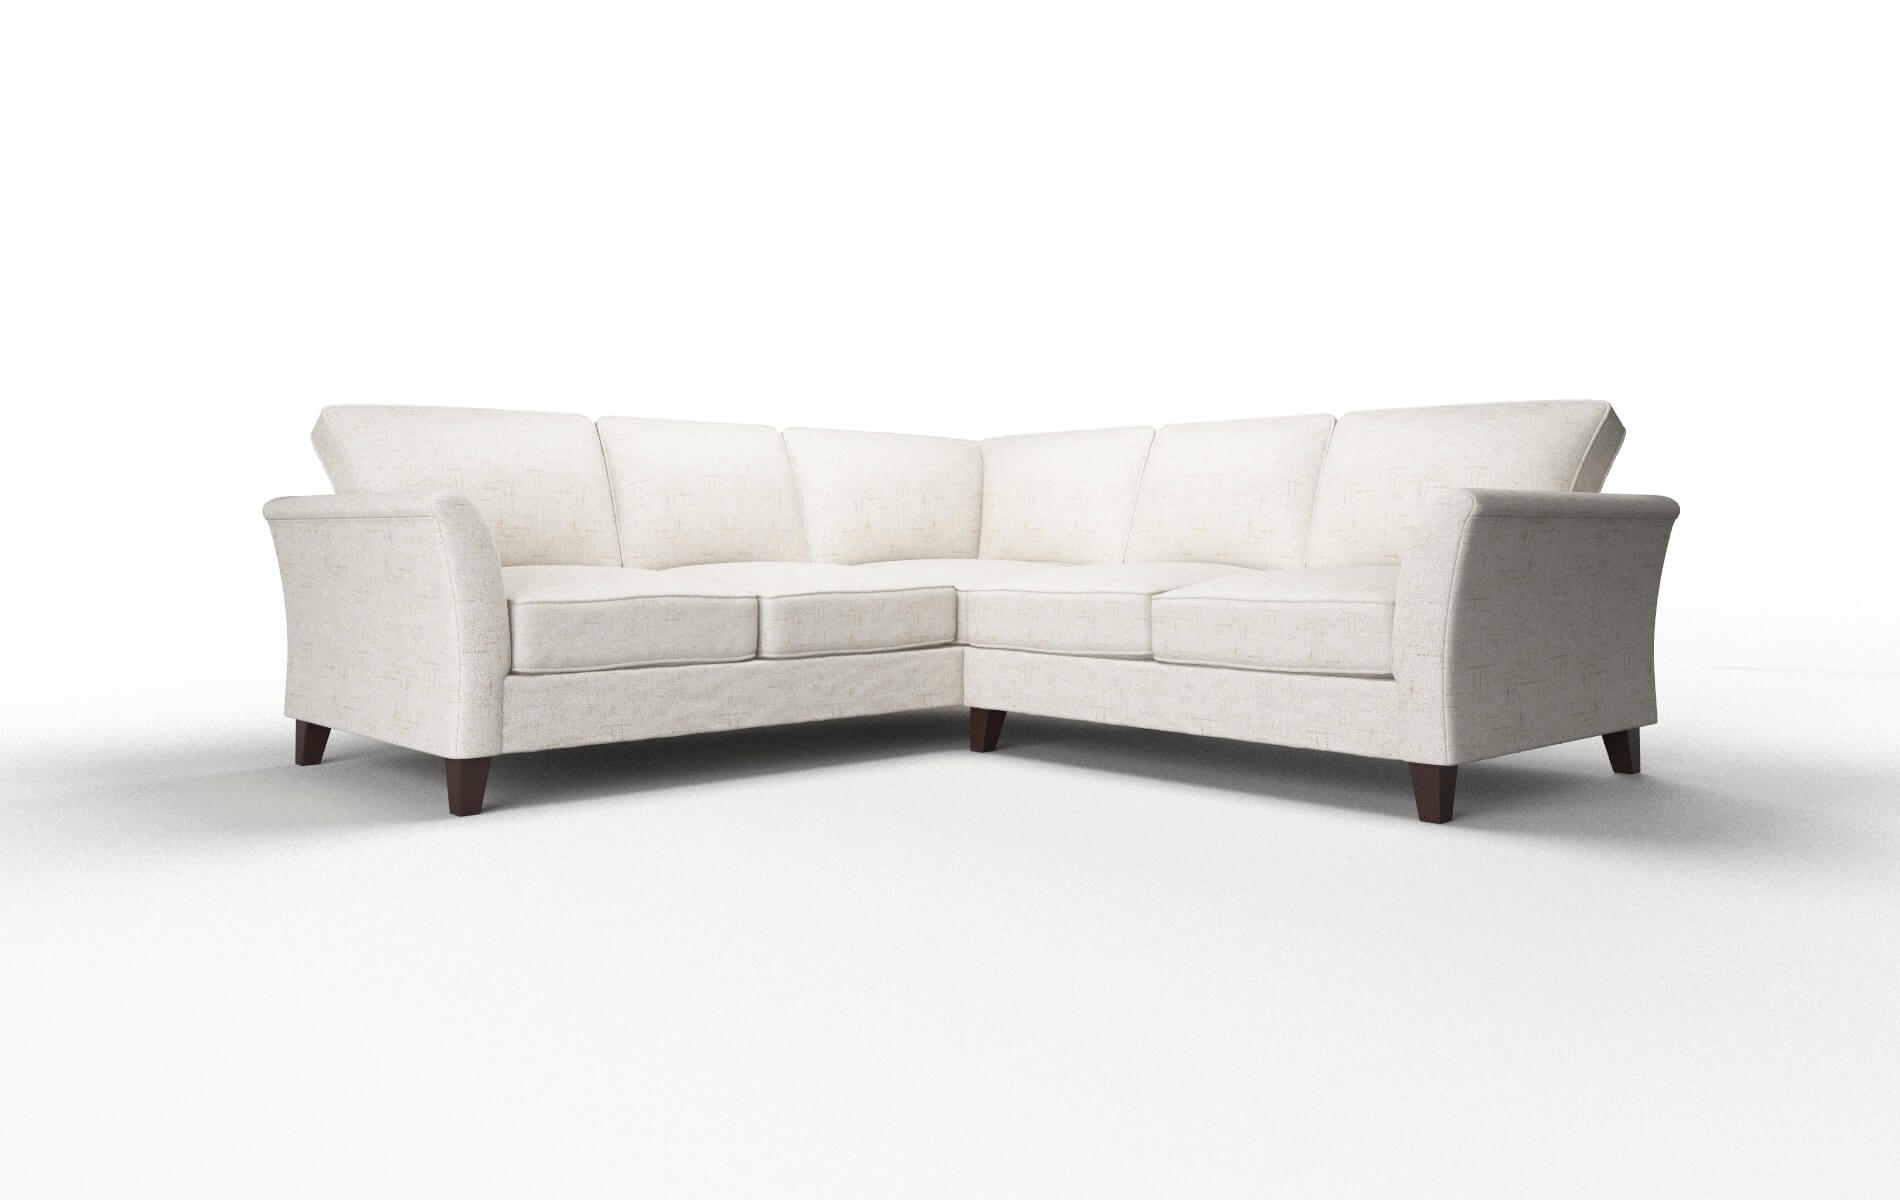 Cologne Oceanside Natural Sectional espresso legs 1